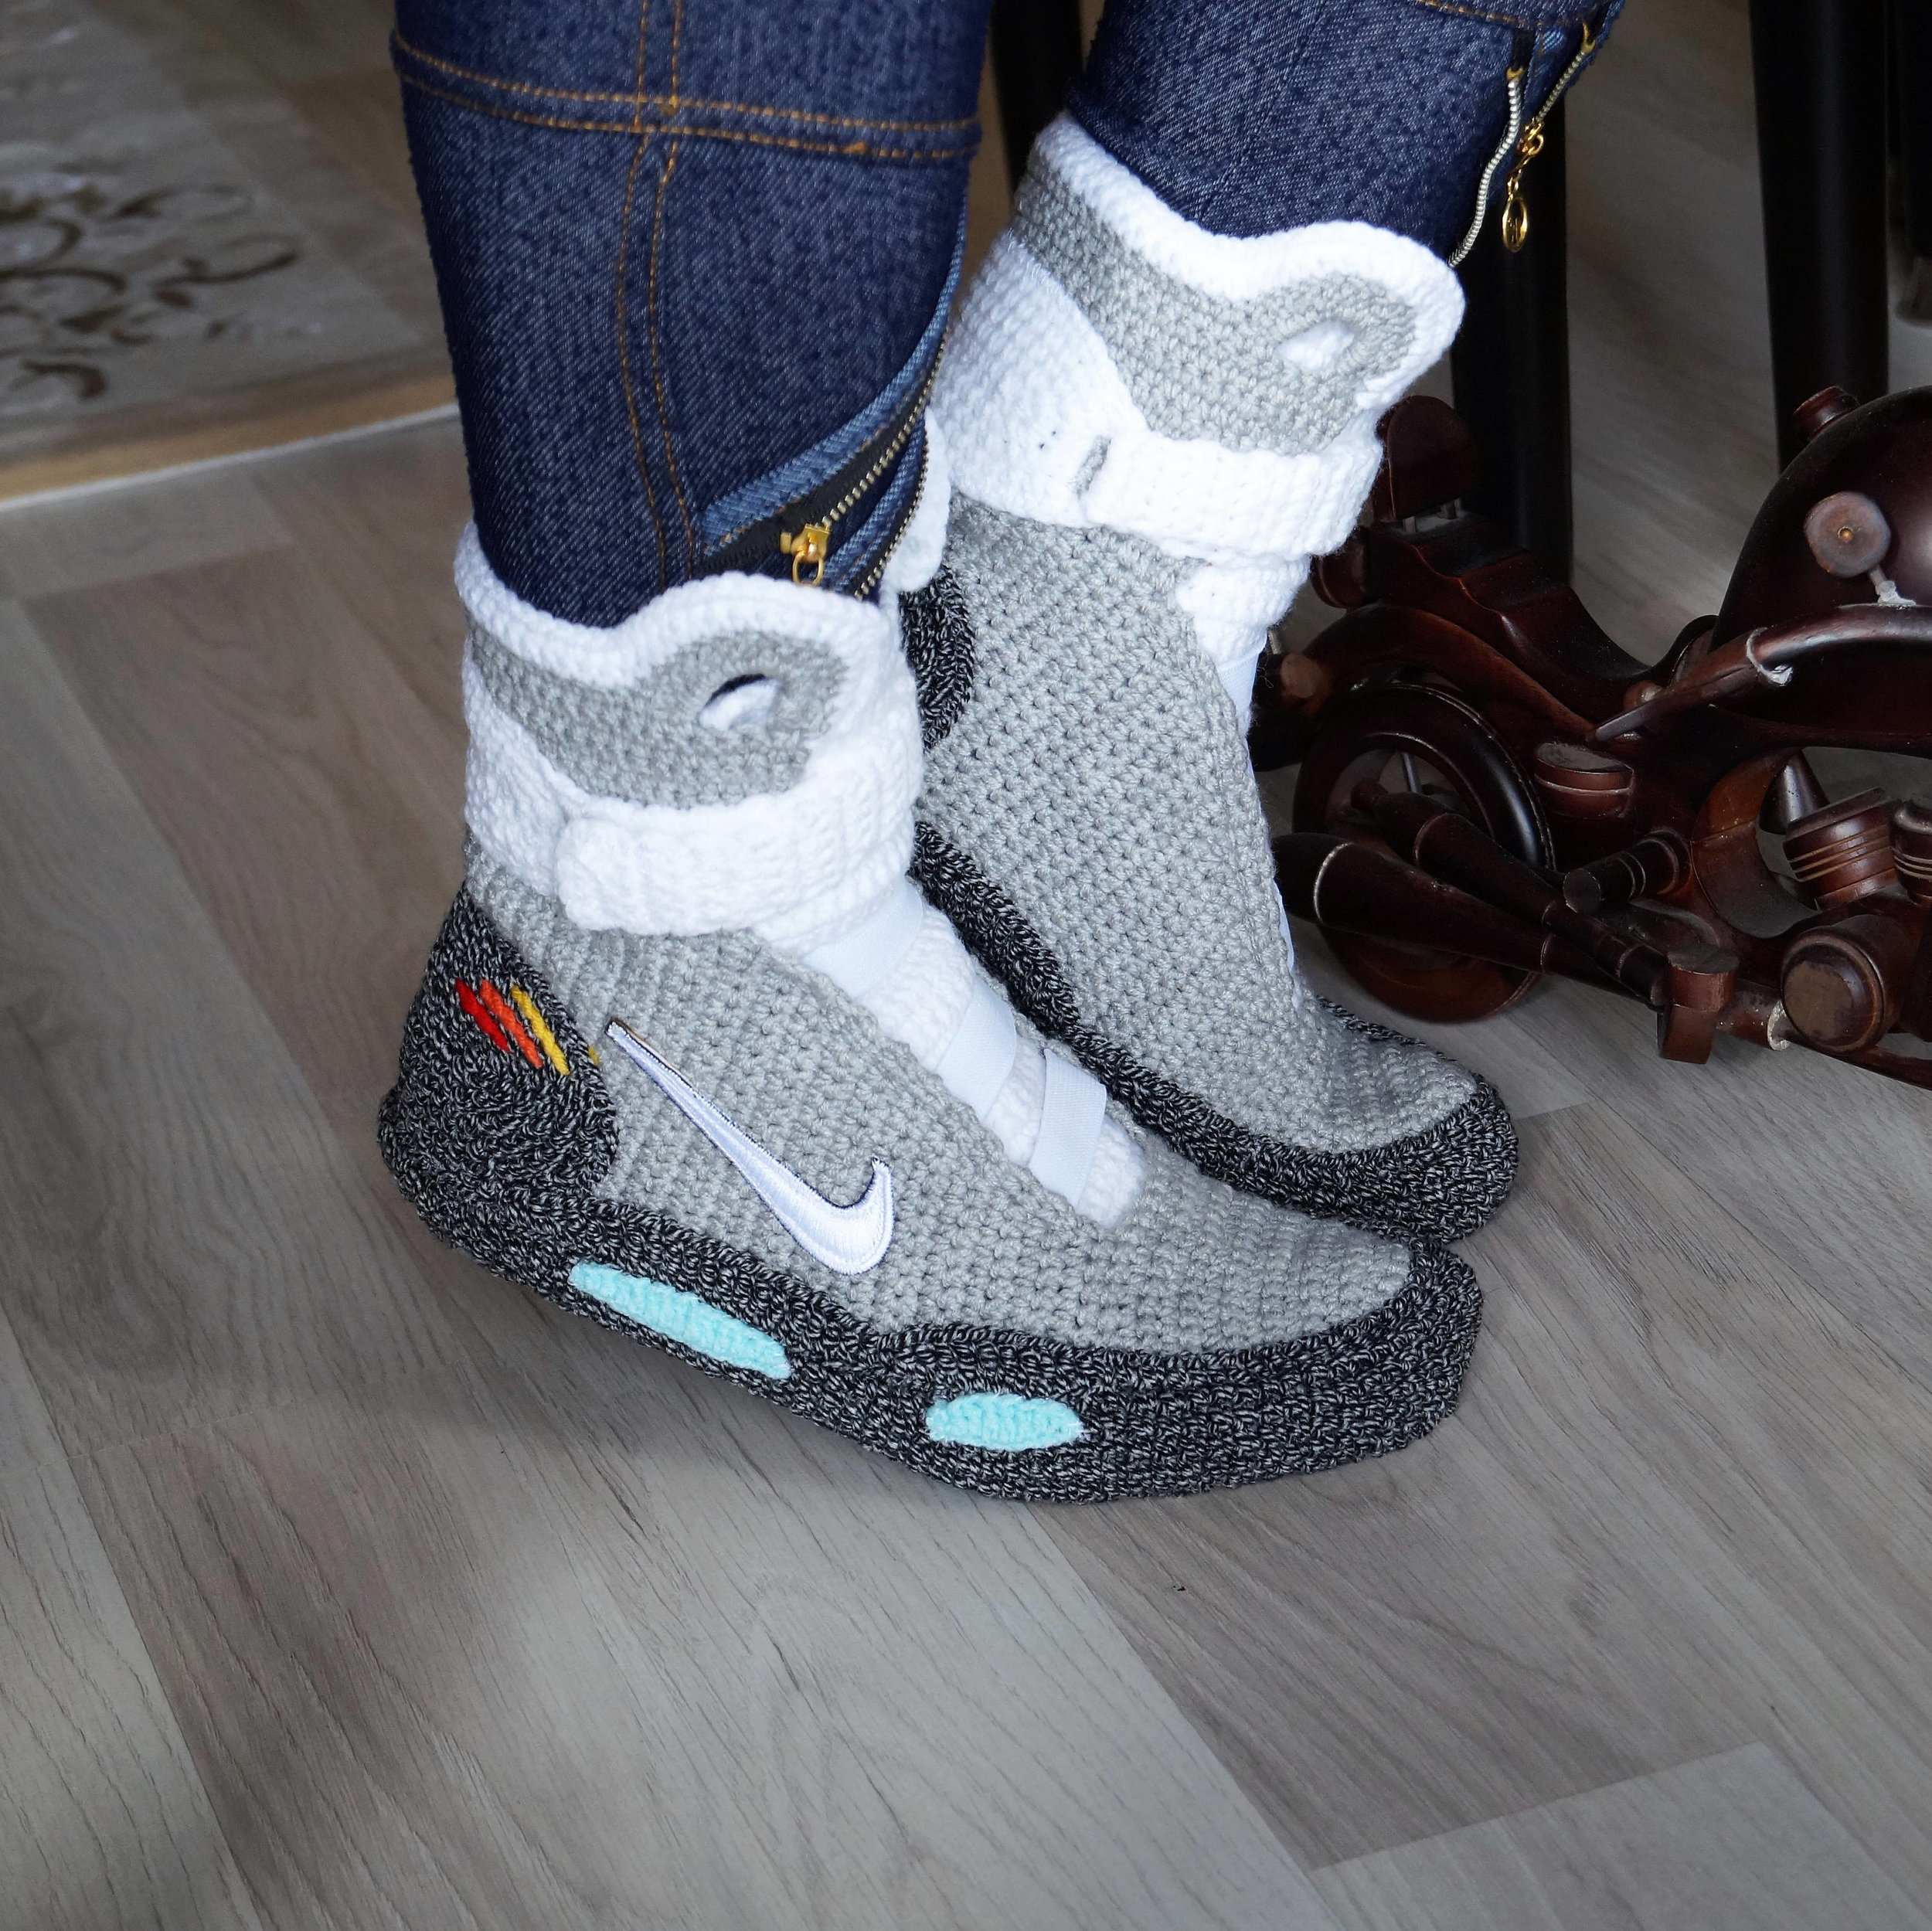 Cool Hand-Crafted BACK TO FUTURE Nike Air Mags Slippers —